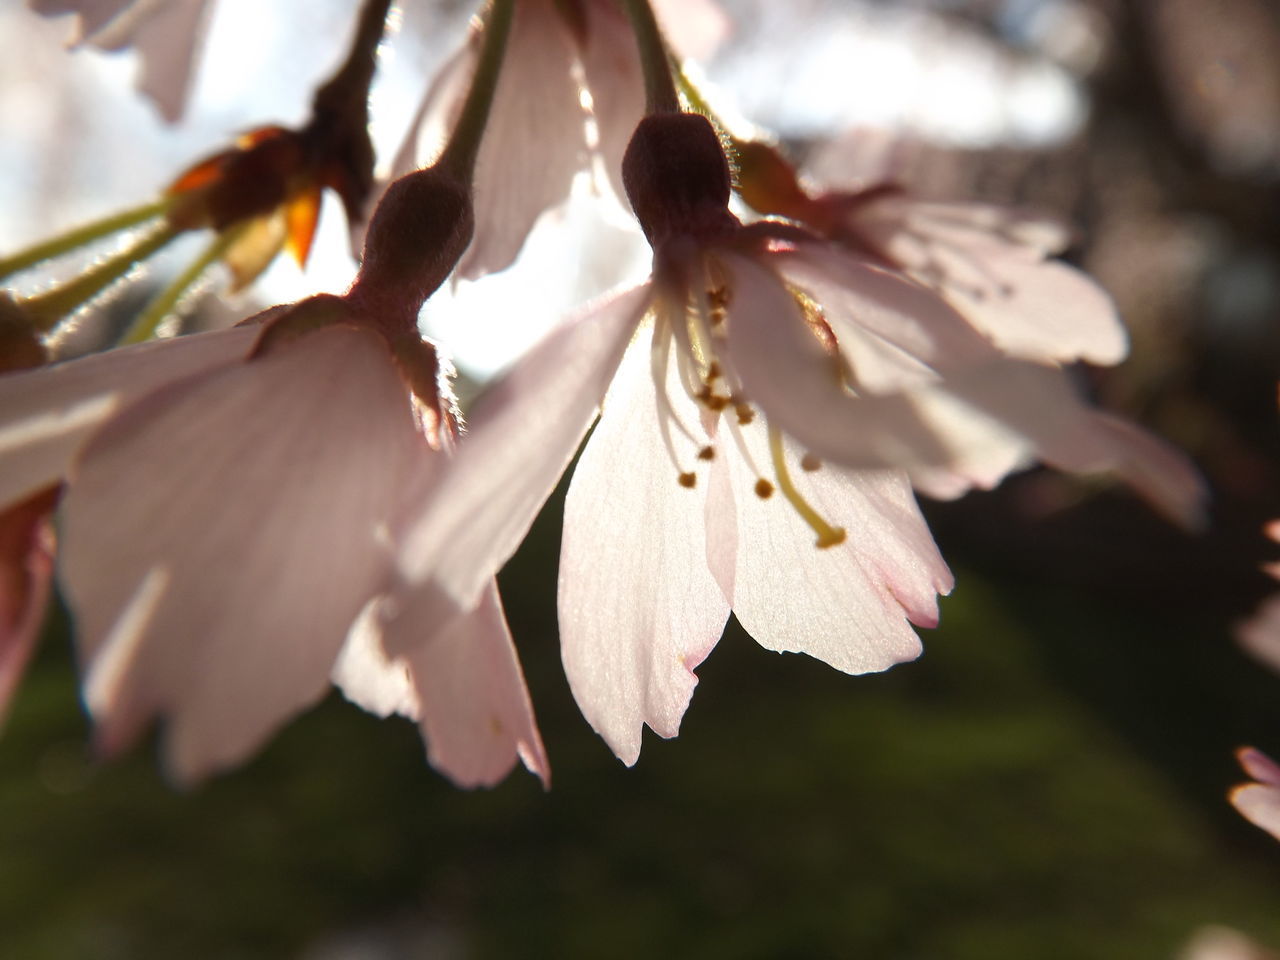 CLOSE-UP OF CHERRY BLOSSOMS IN SPRING